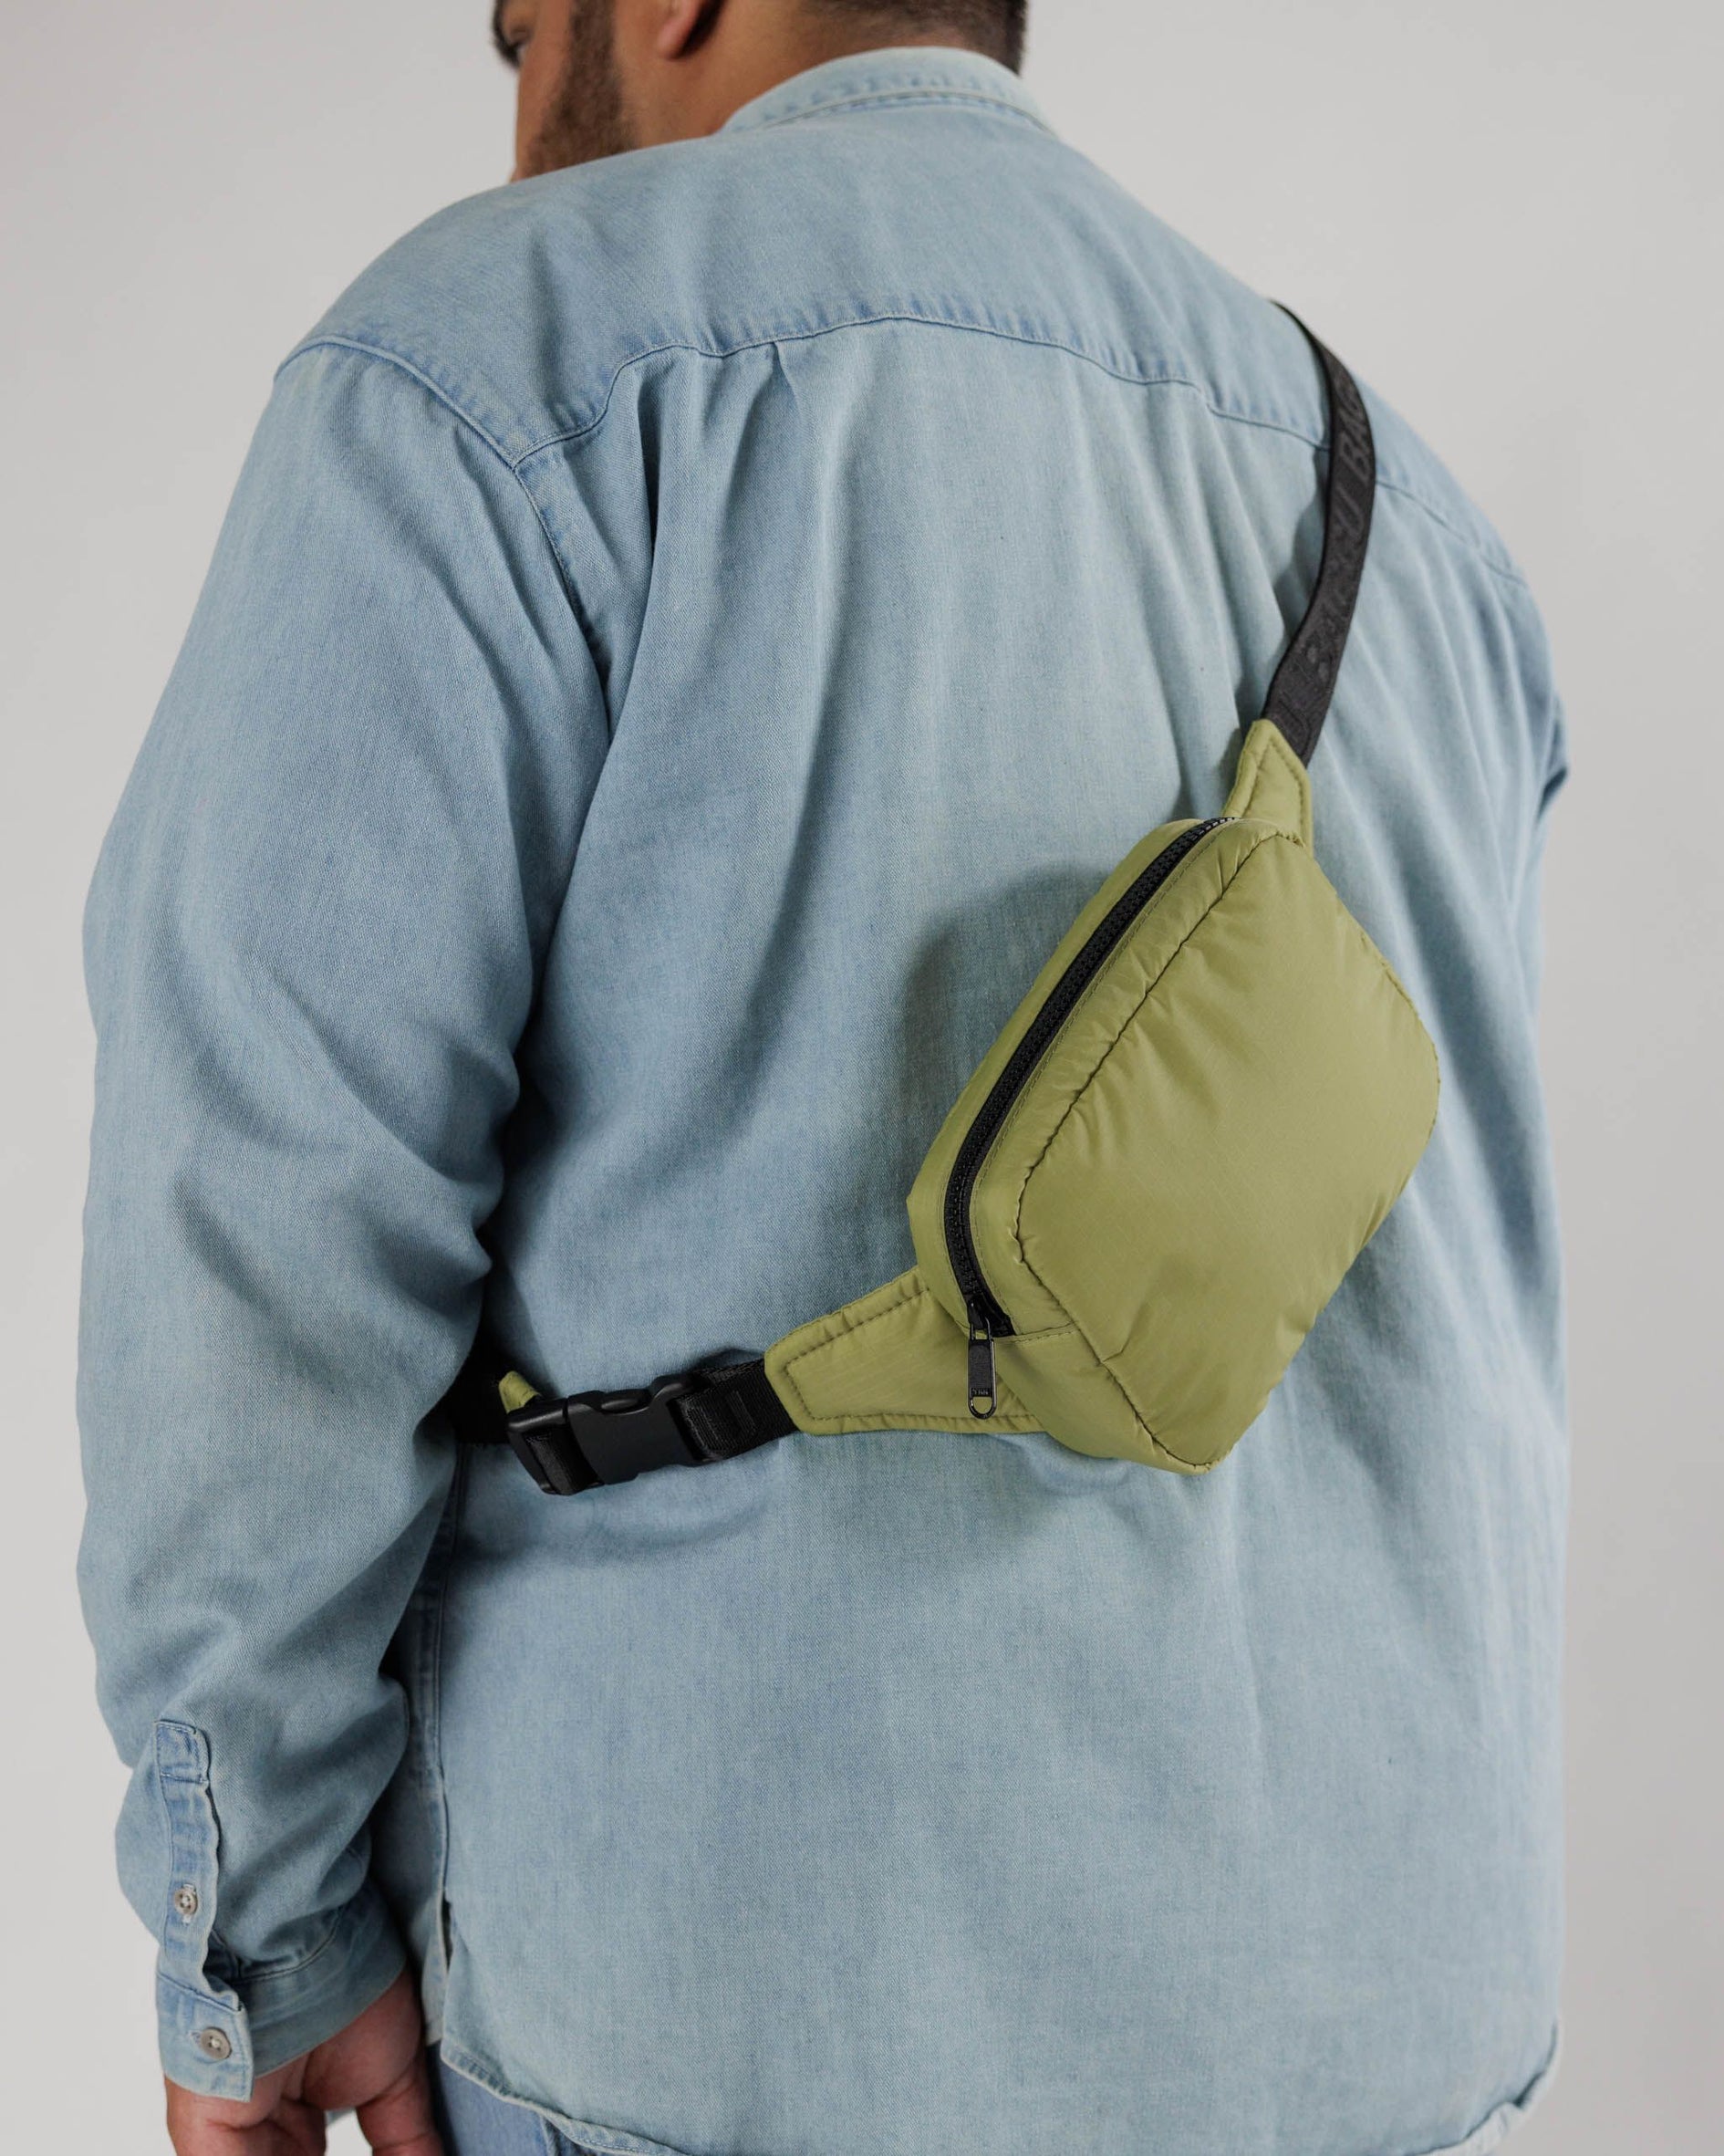 Puffy Fanny Pack